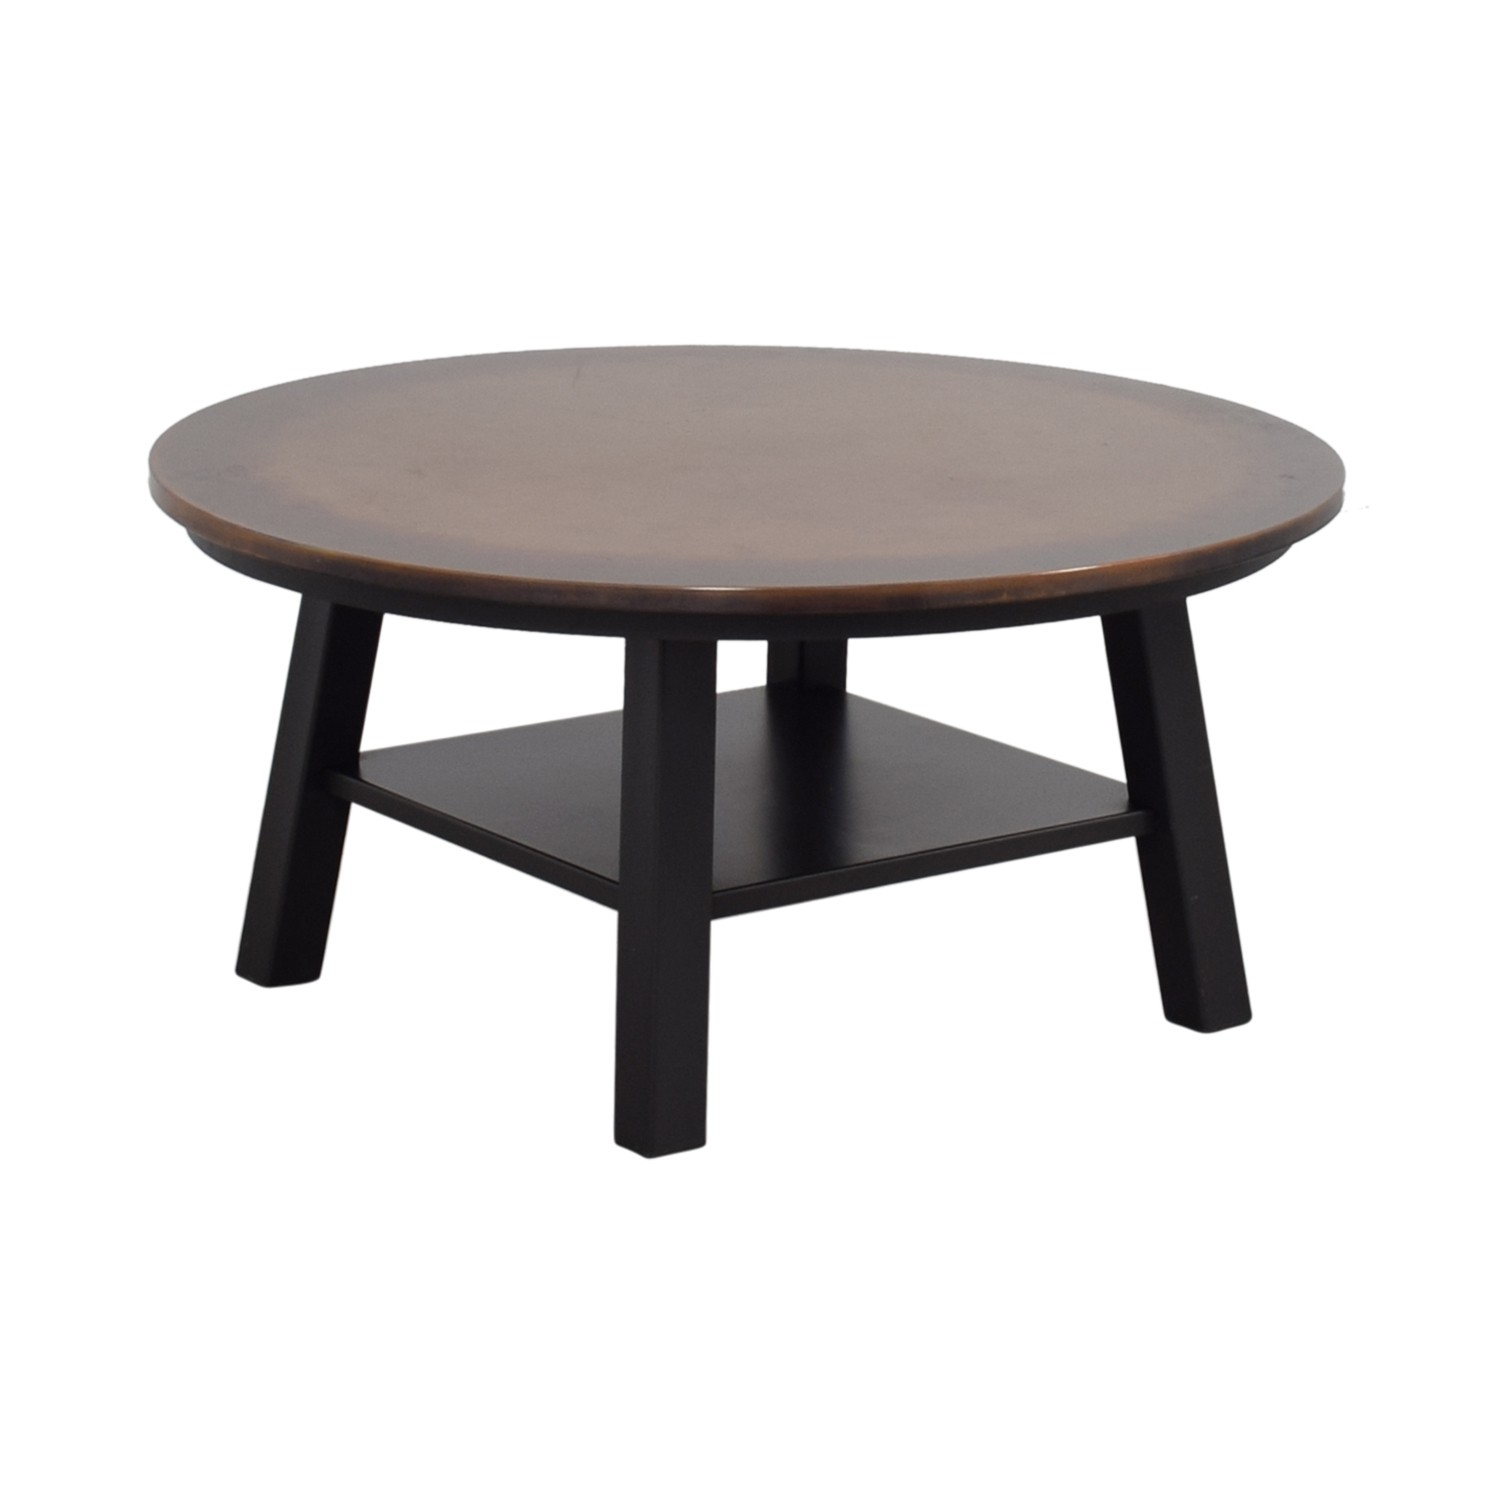 90 off round copper top coffee table tables 1